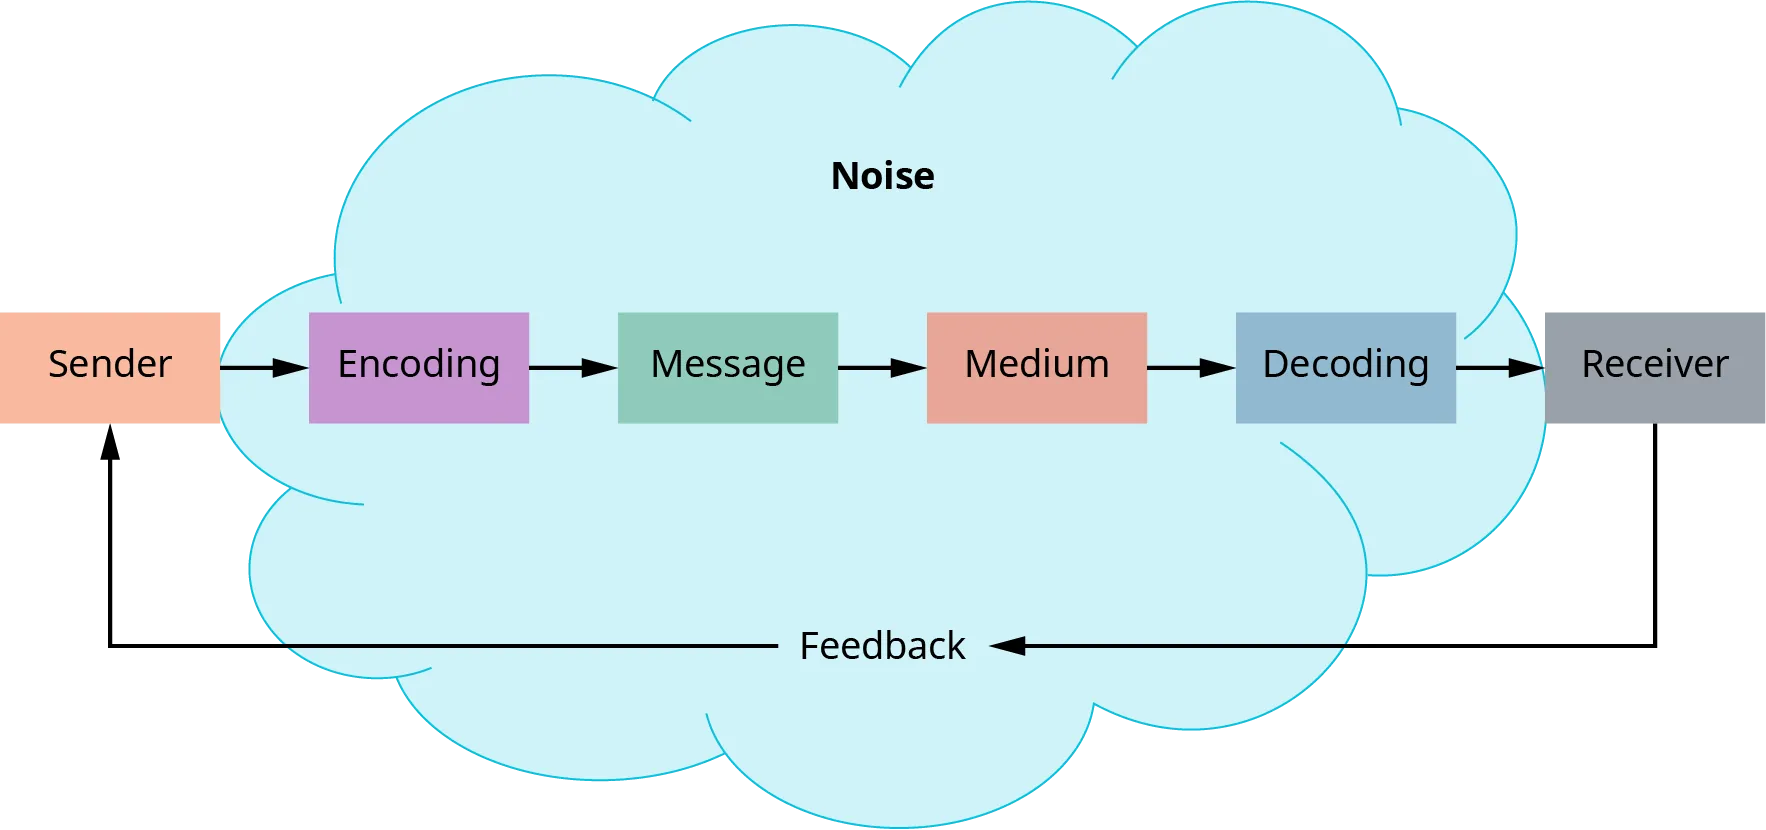 The communication process is shown as boxes along a horizontal line. Rightward pointing arrows connect each box. Starting from the left, the boxes are labelled sender, encoding, message, medium, decoding, and receiver. A line labelled feedback goes from receiver, below the other labelled boxes, back to sender. Behind all of the boxes and feedback line is a cloud labelled noise.